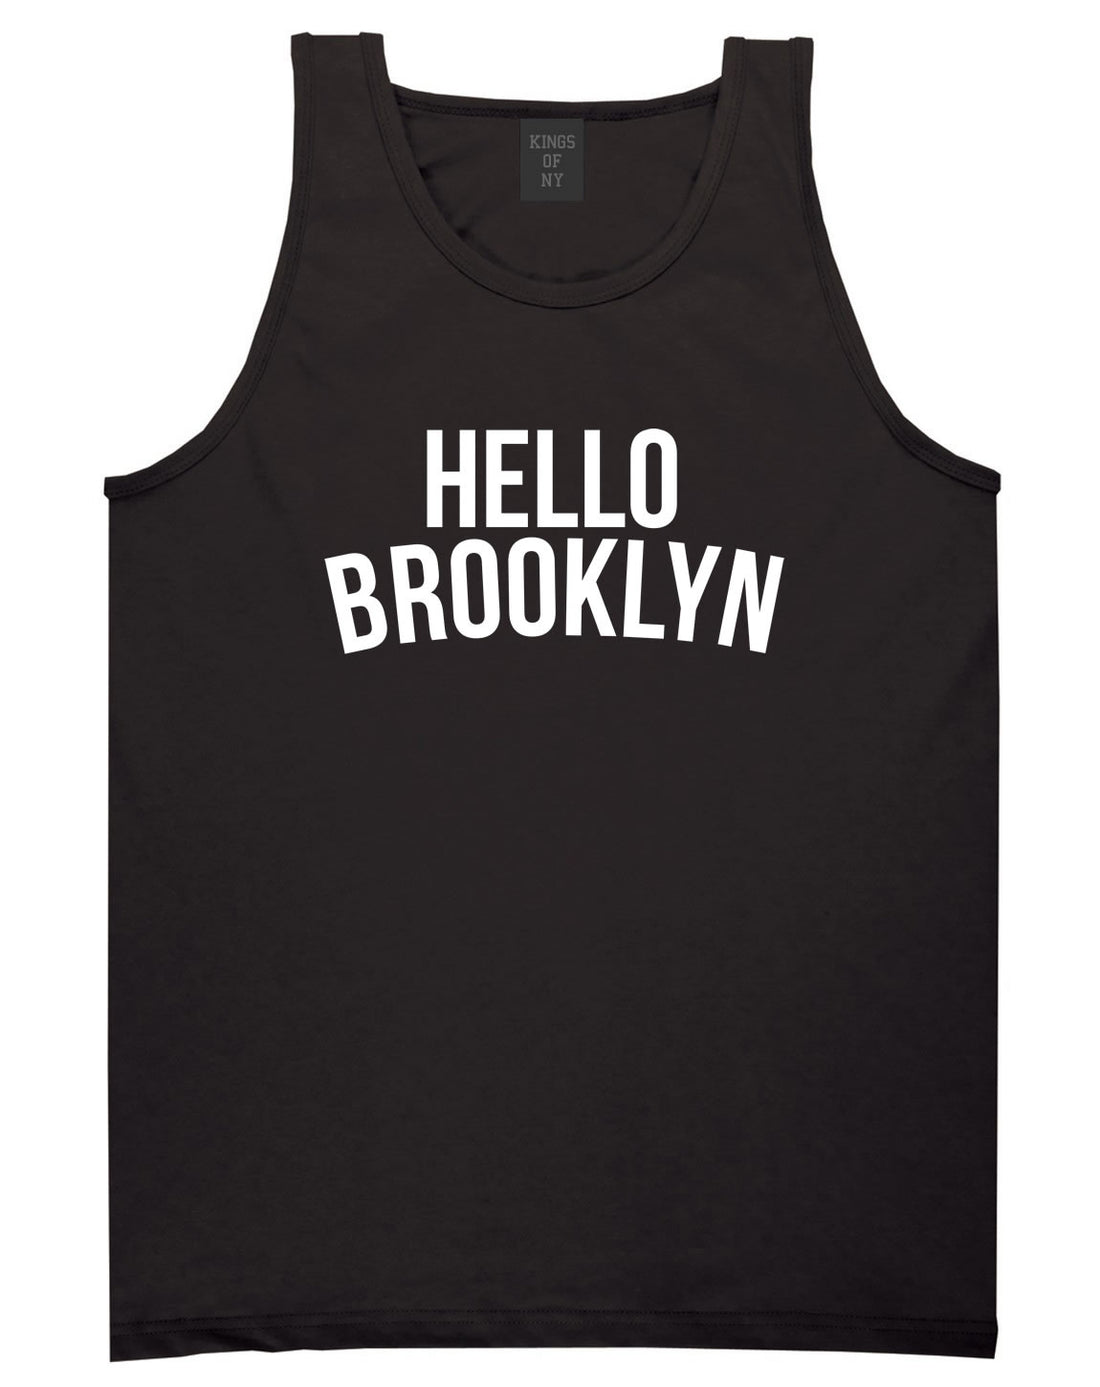 Hello Brooklyn Tank Top in Black By Kings Of NY